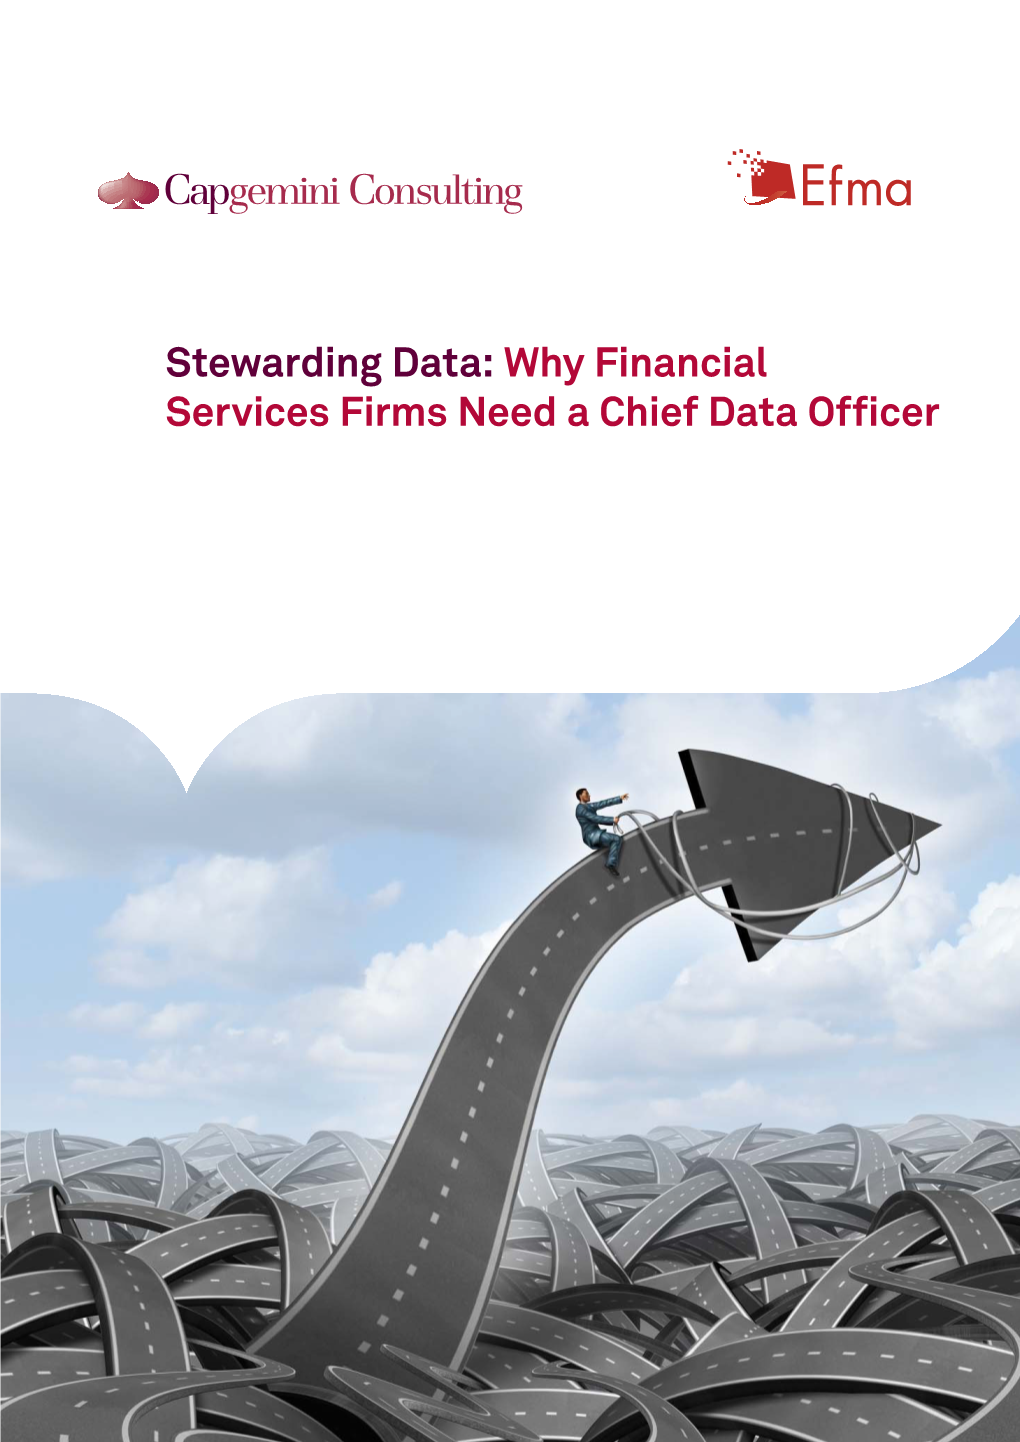 Why Financial Services Firms Need a Chief Data Officer Why Chief Data Ofﬁ Cers Are a Necessity, Not a Luxury